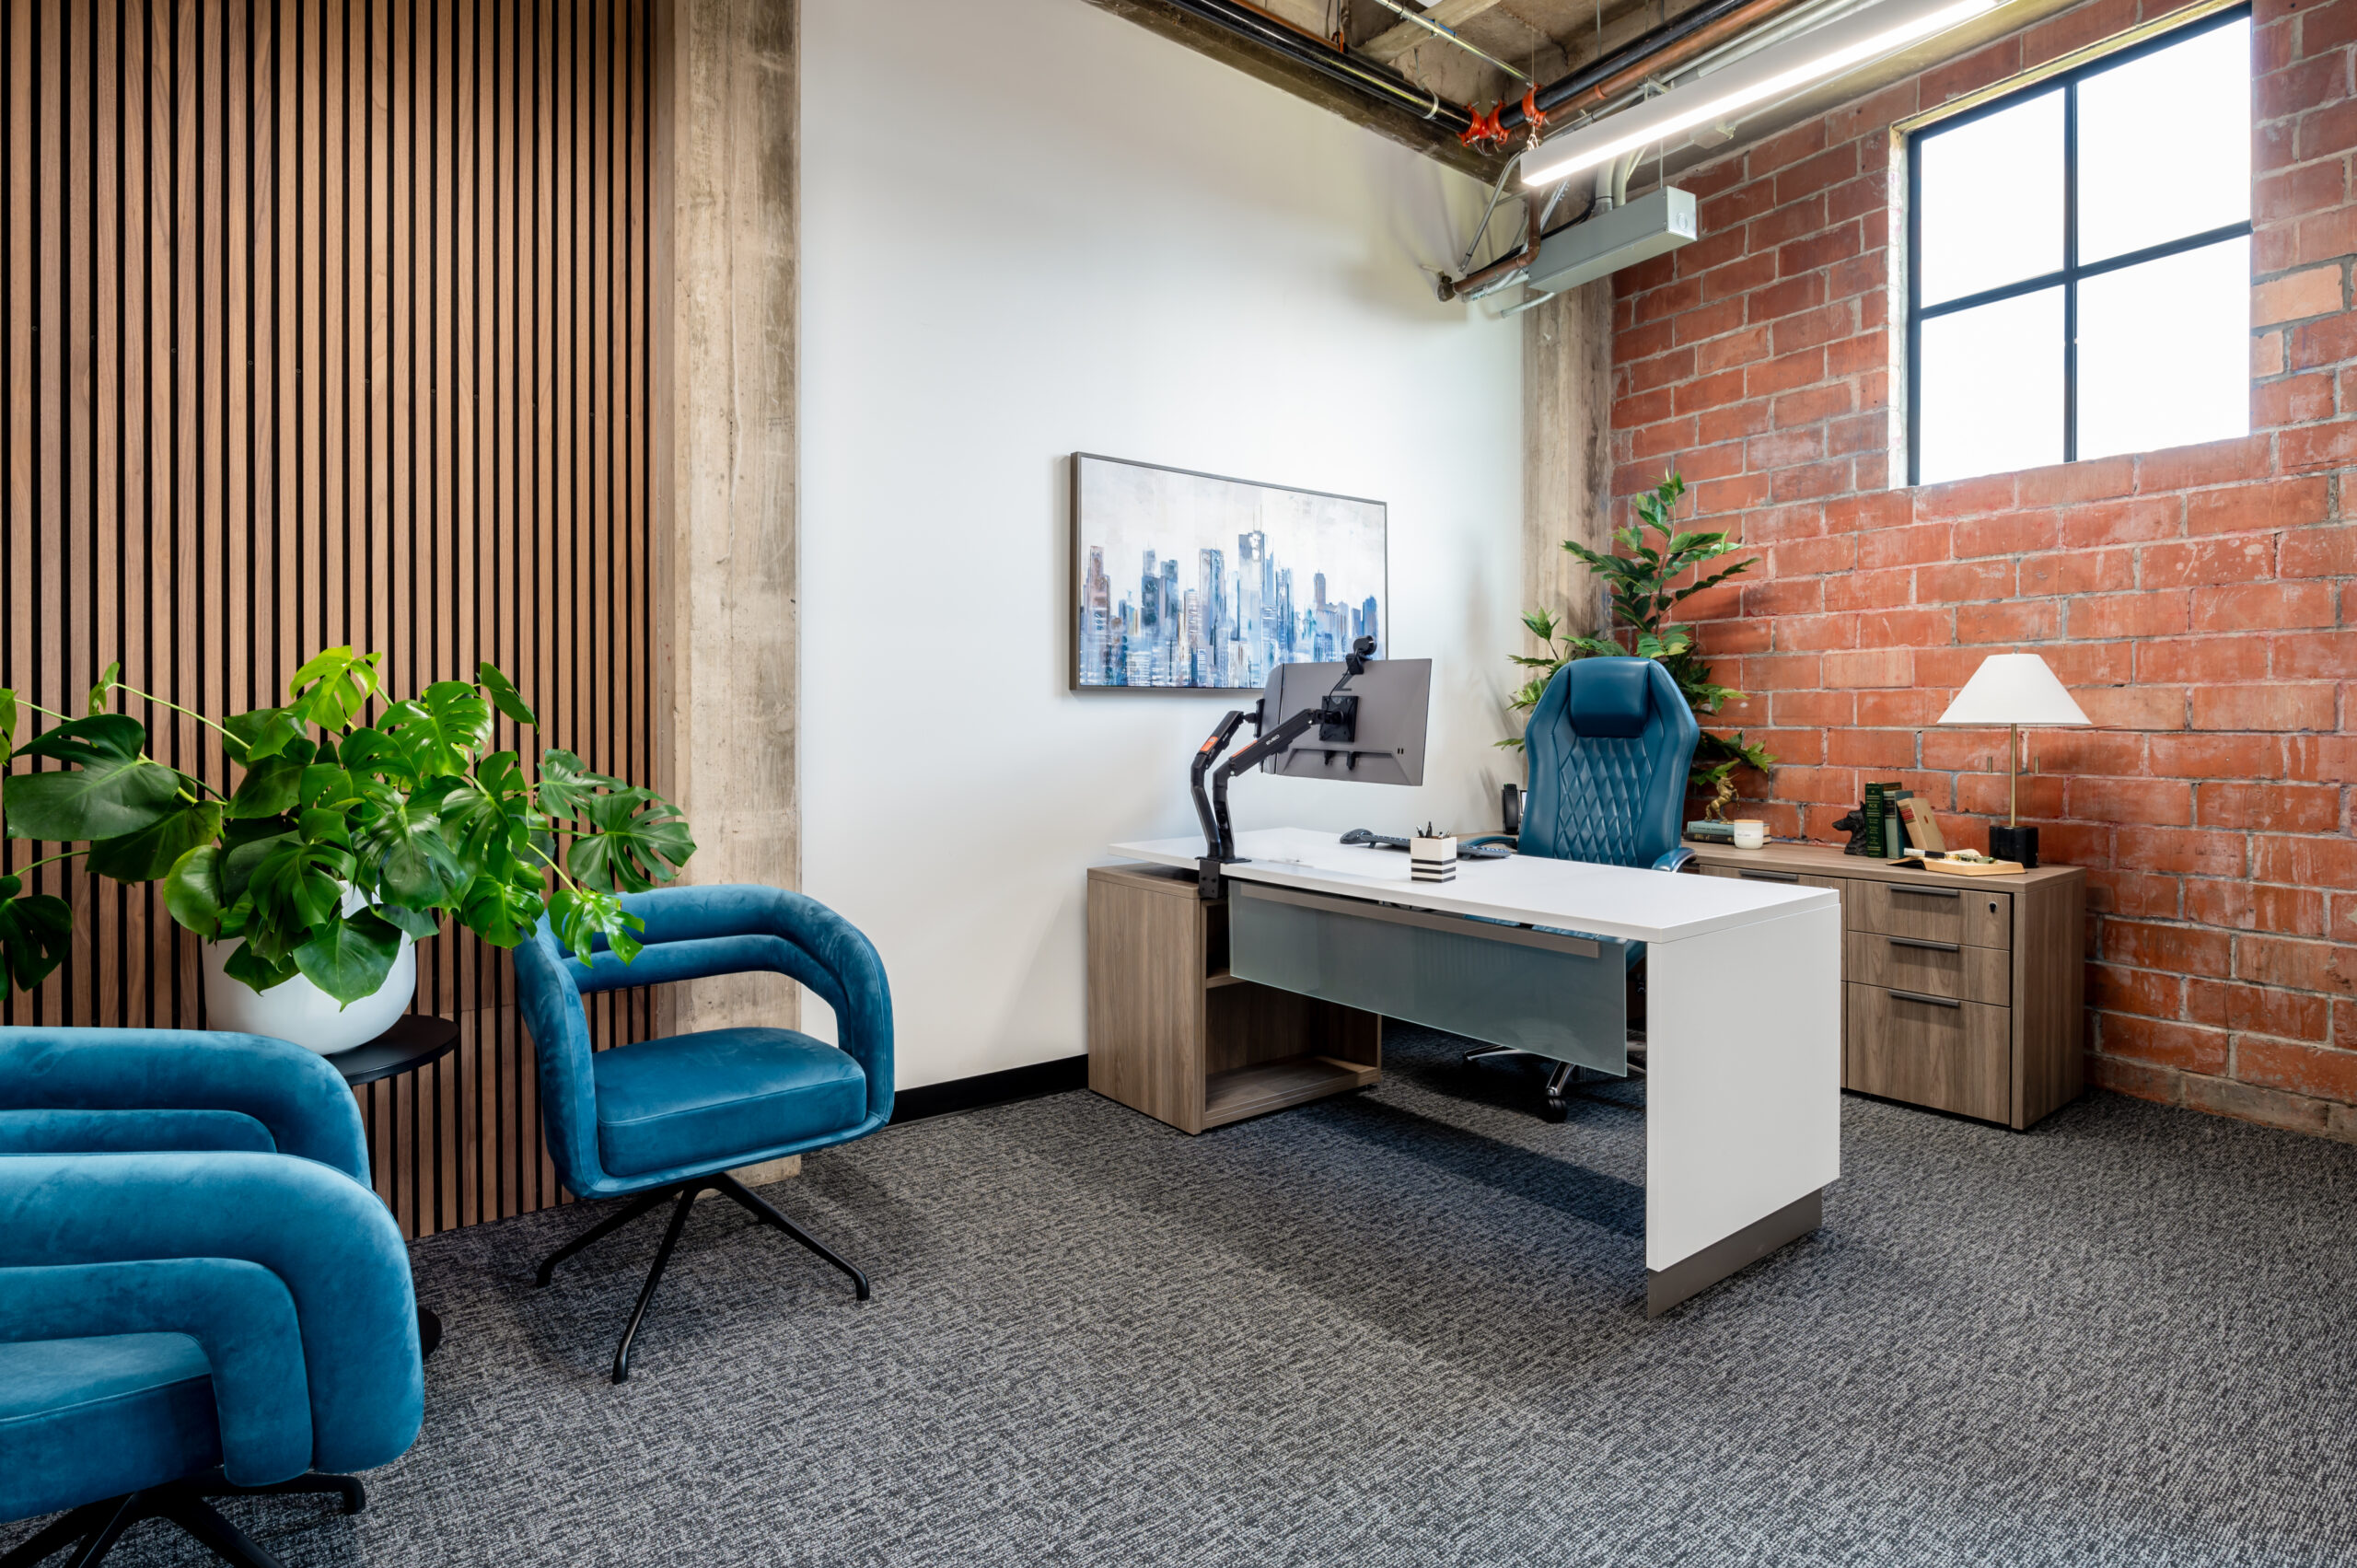 Industrial interior design office space with brick walls